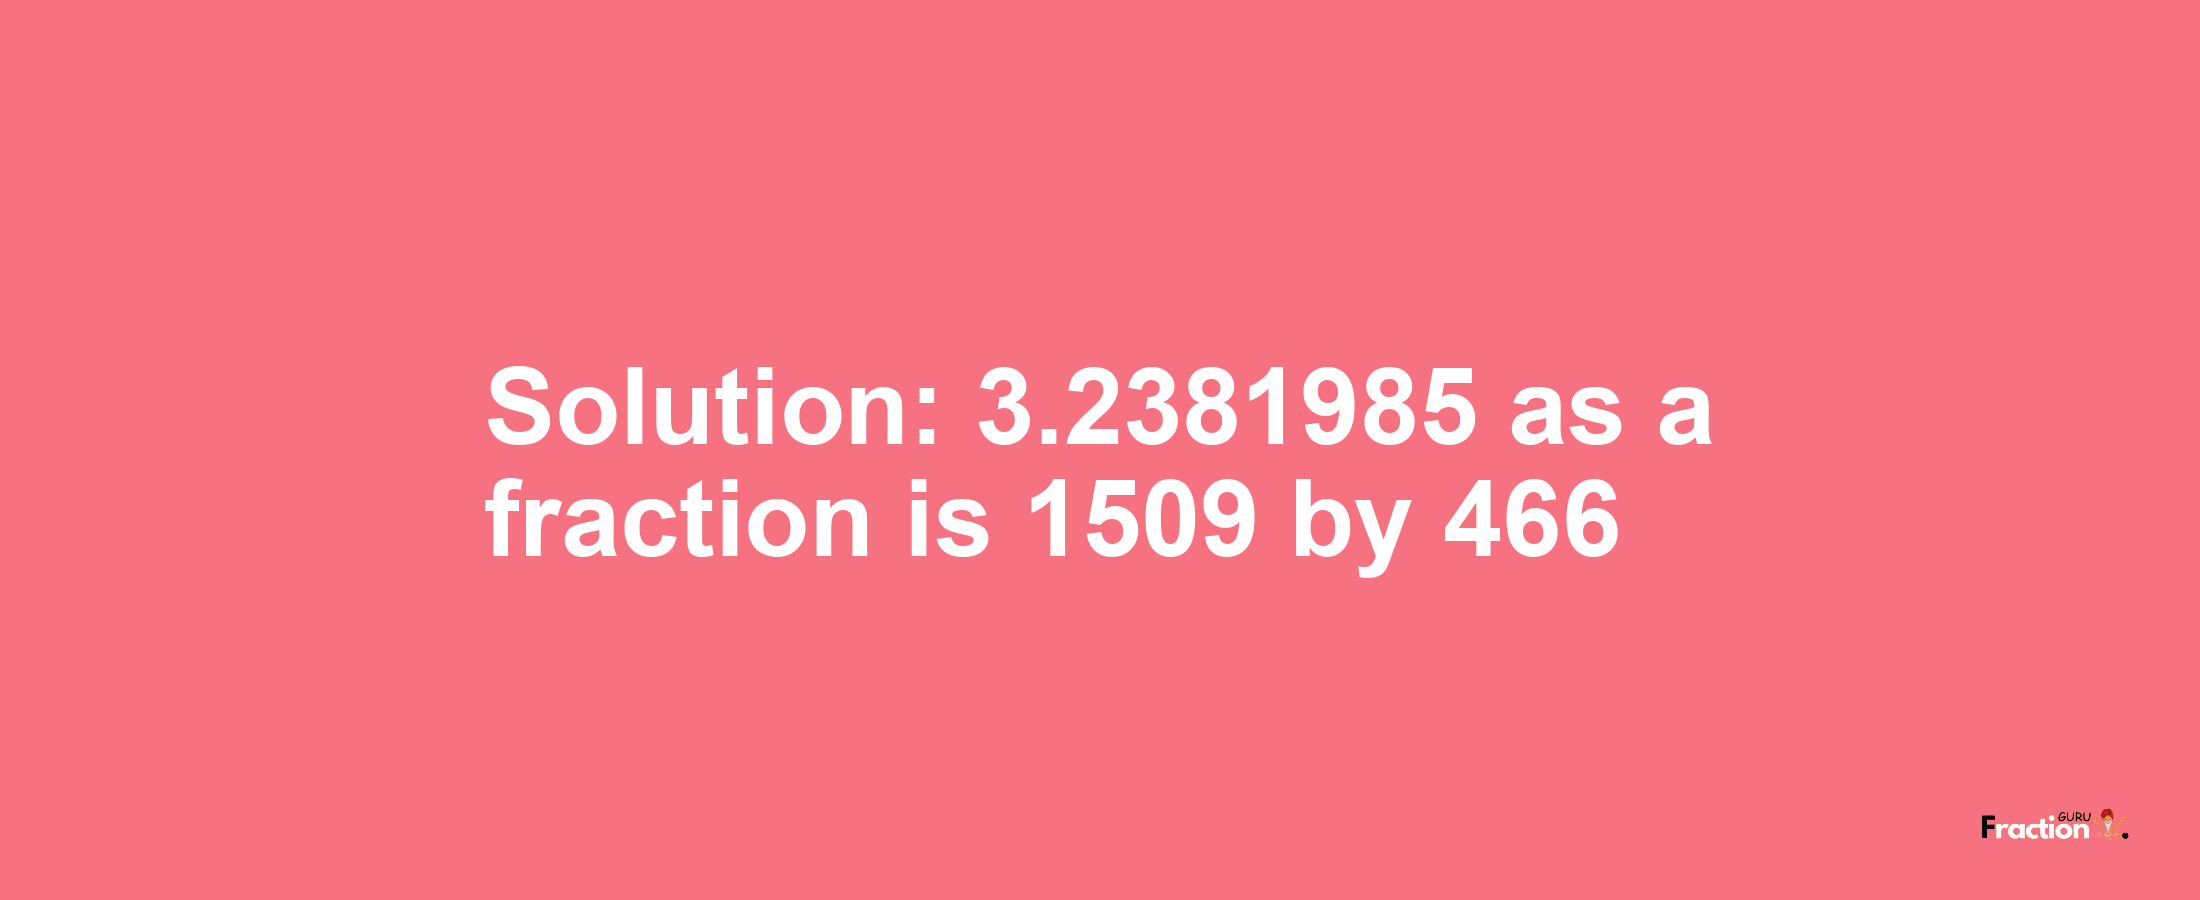 Solution:3.2381985 as a fraction is 1509/466